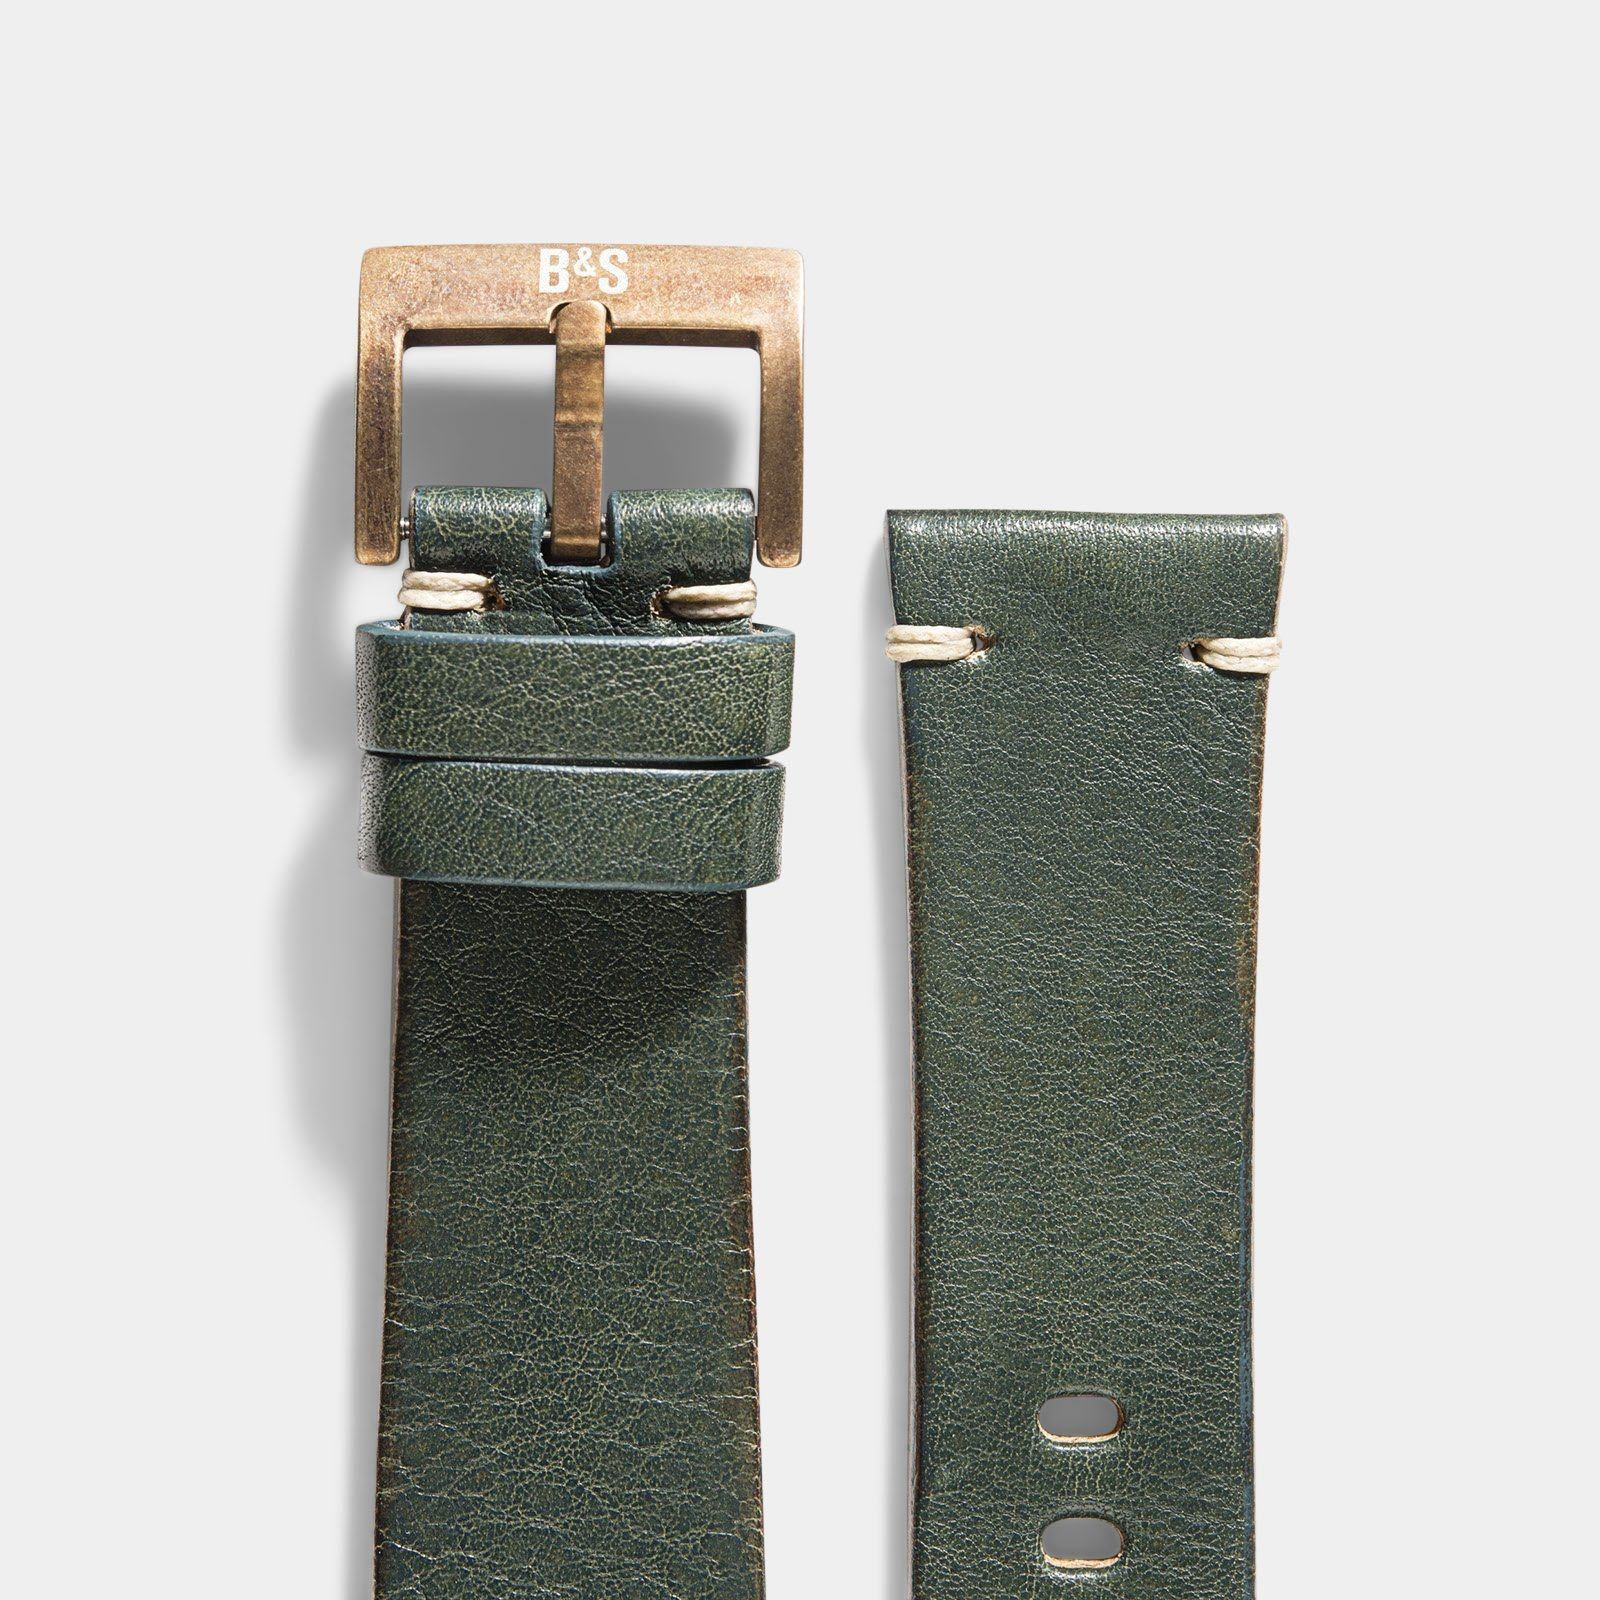 Anyone know how I can get a leather strap that matches the colour